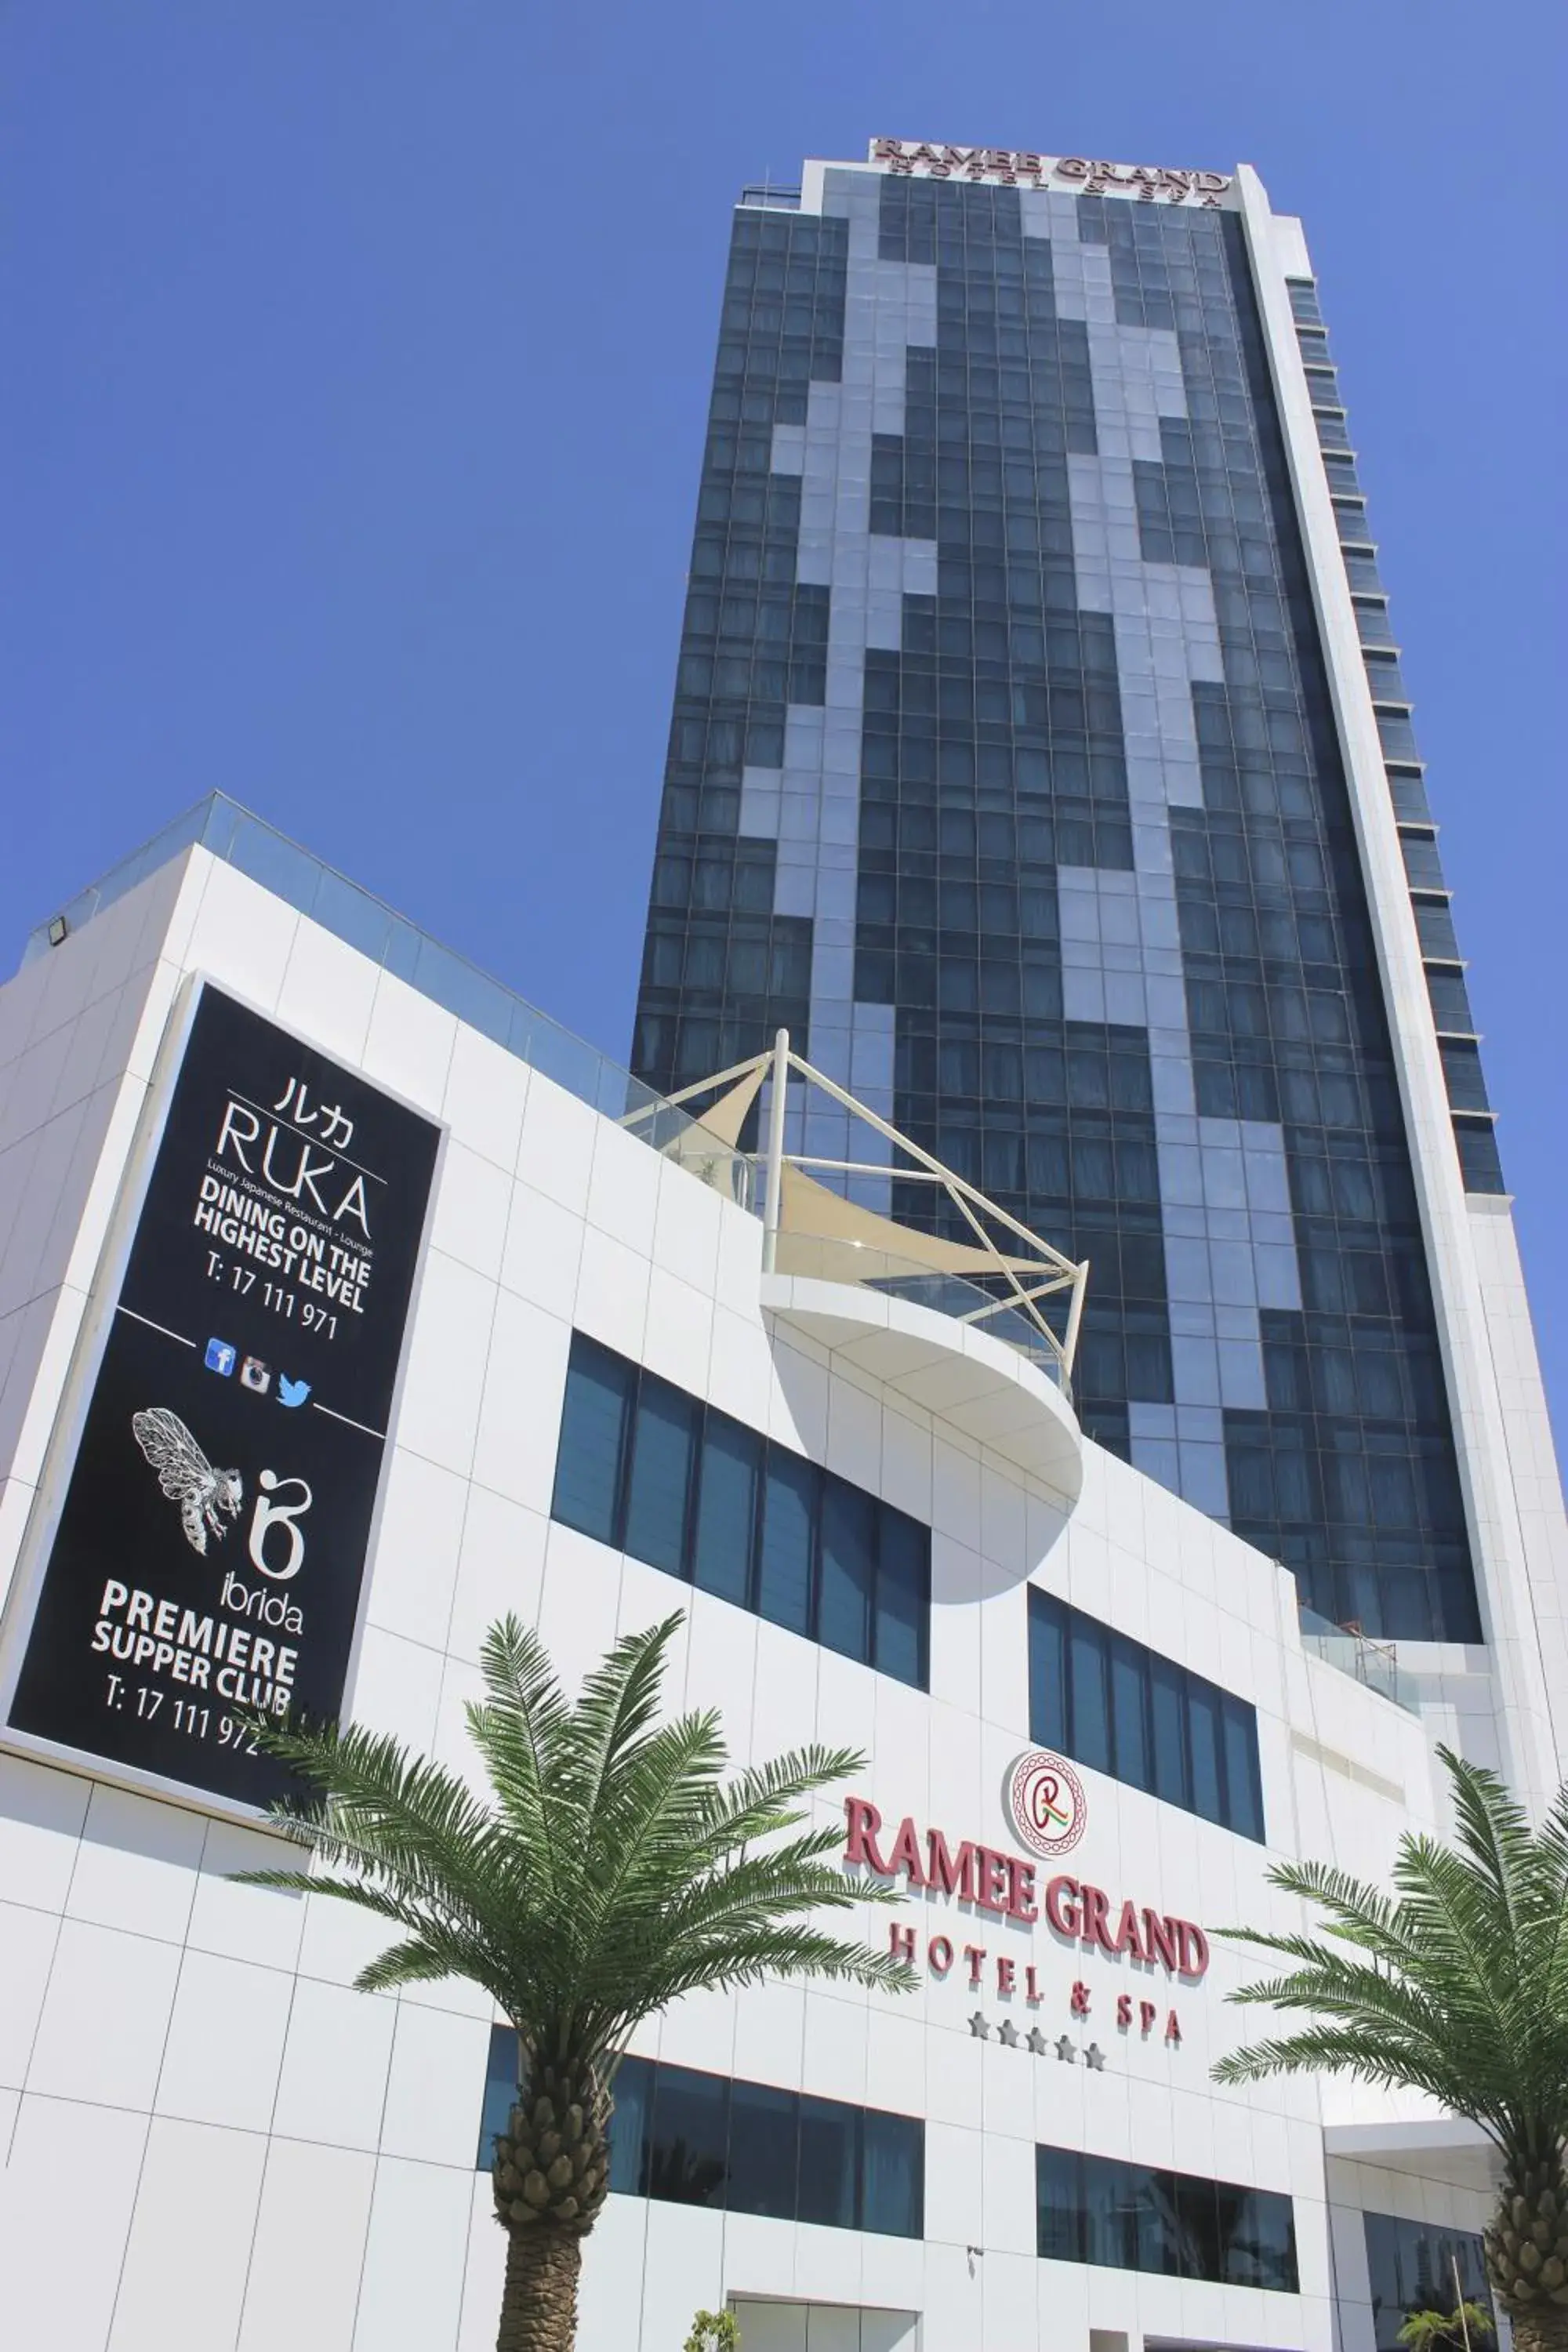 Property Building in Ramee Grand Hotel And Spa